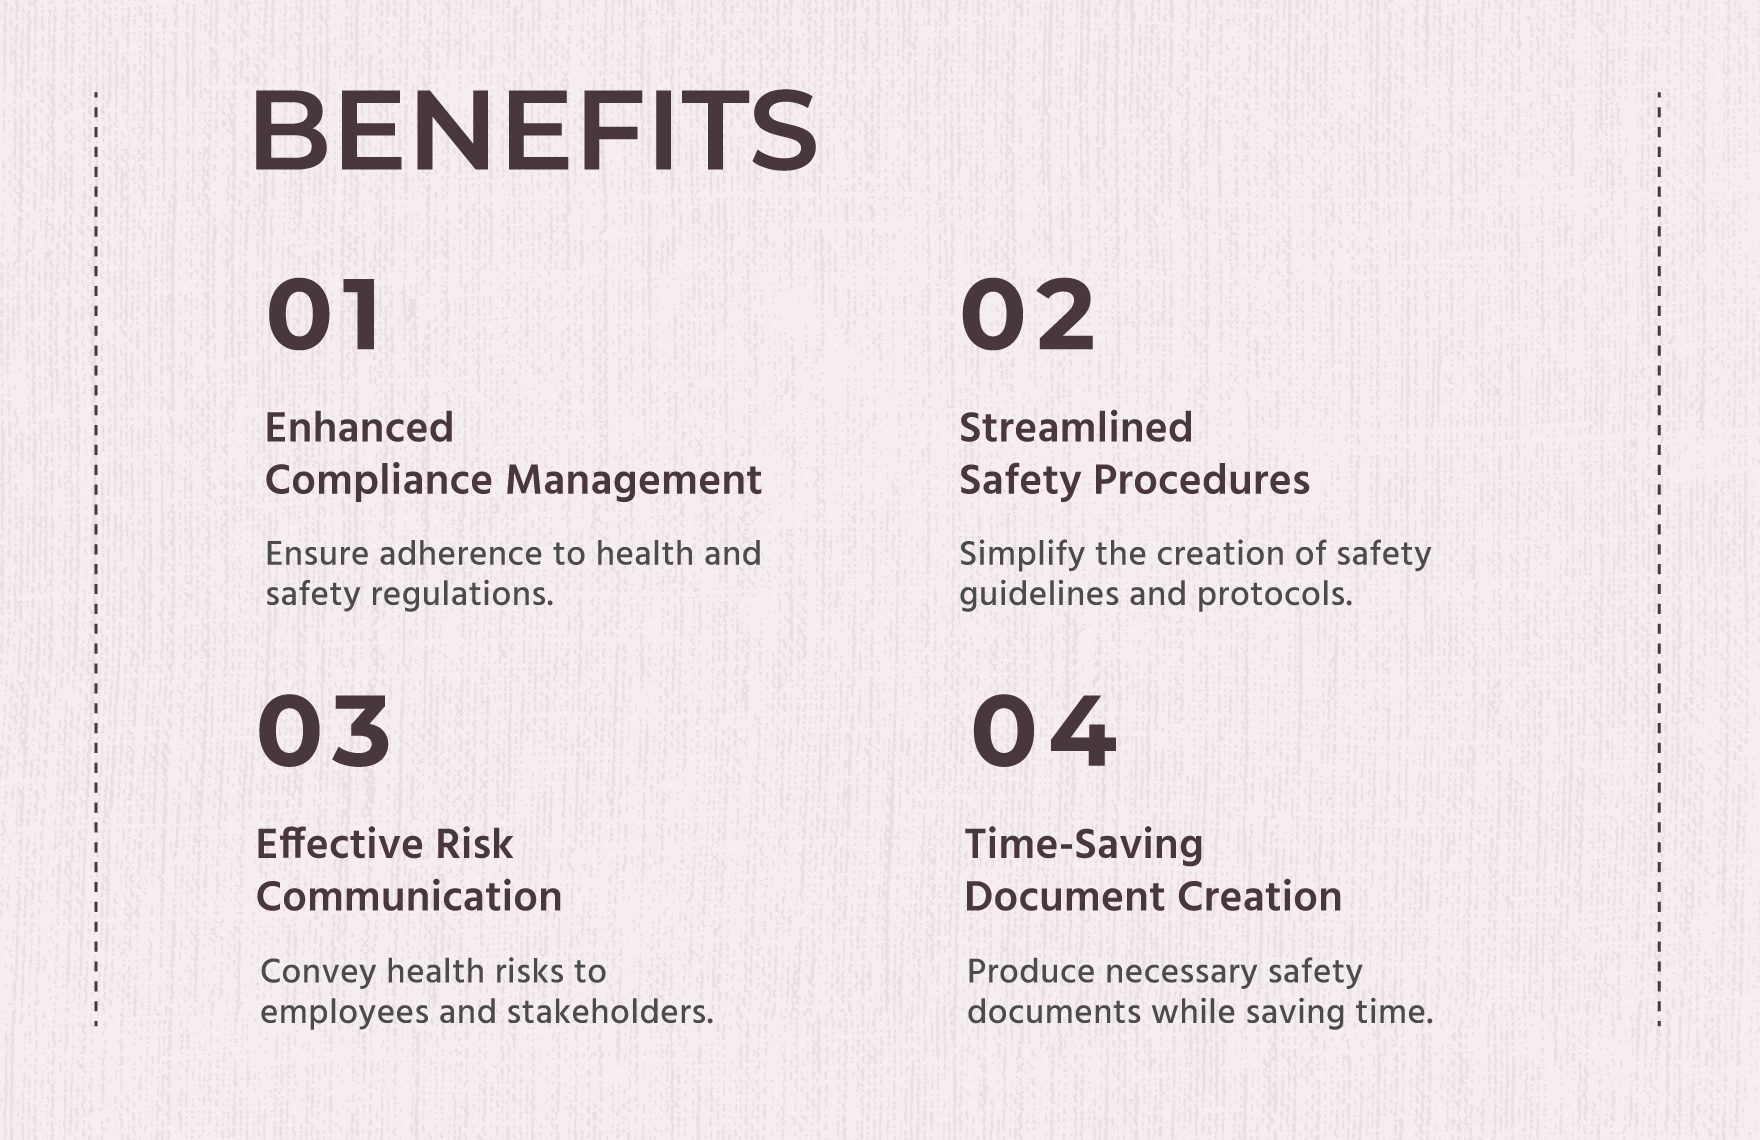 Health & Safety Training Program Proposal Template